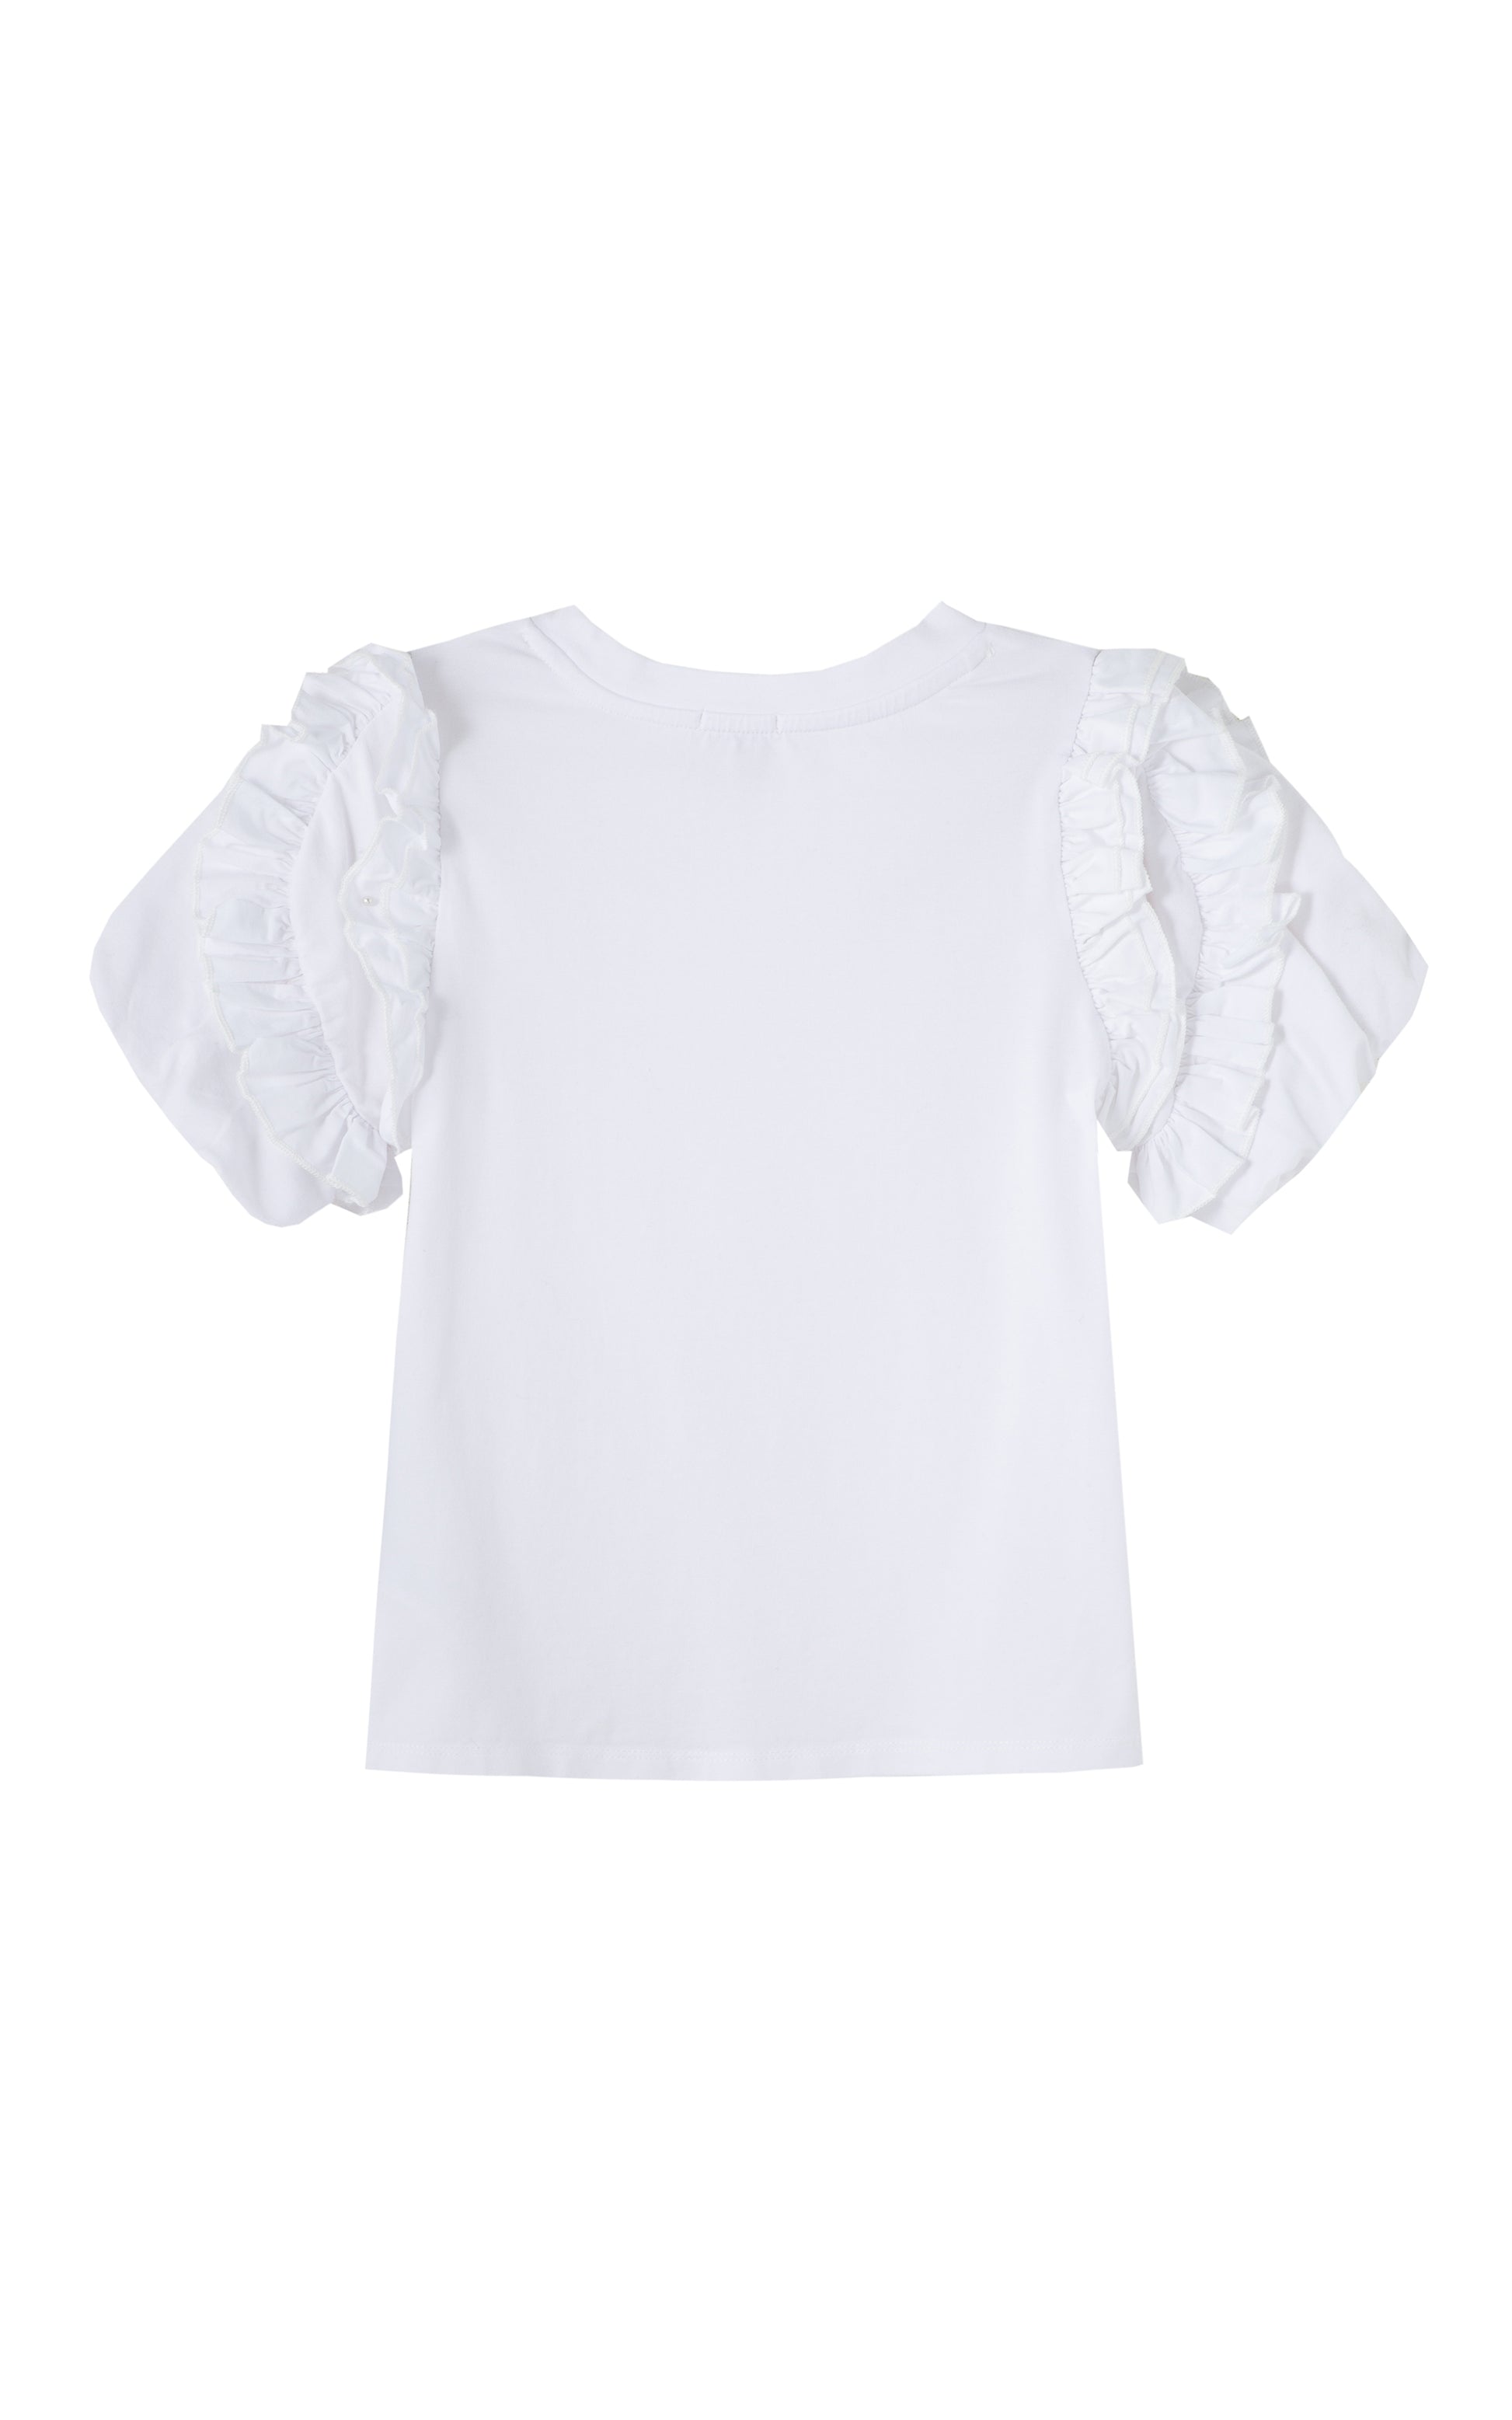 BACK OF WHITE T-SHIRT WITH PLEATED RUFFLED SLEEVES